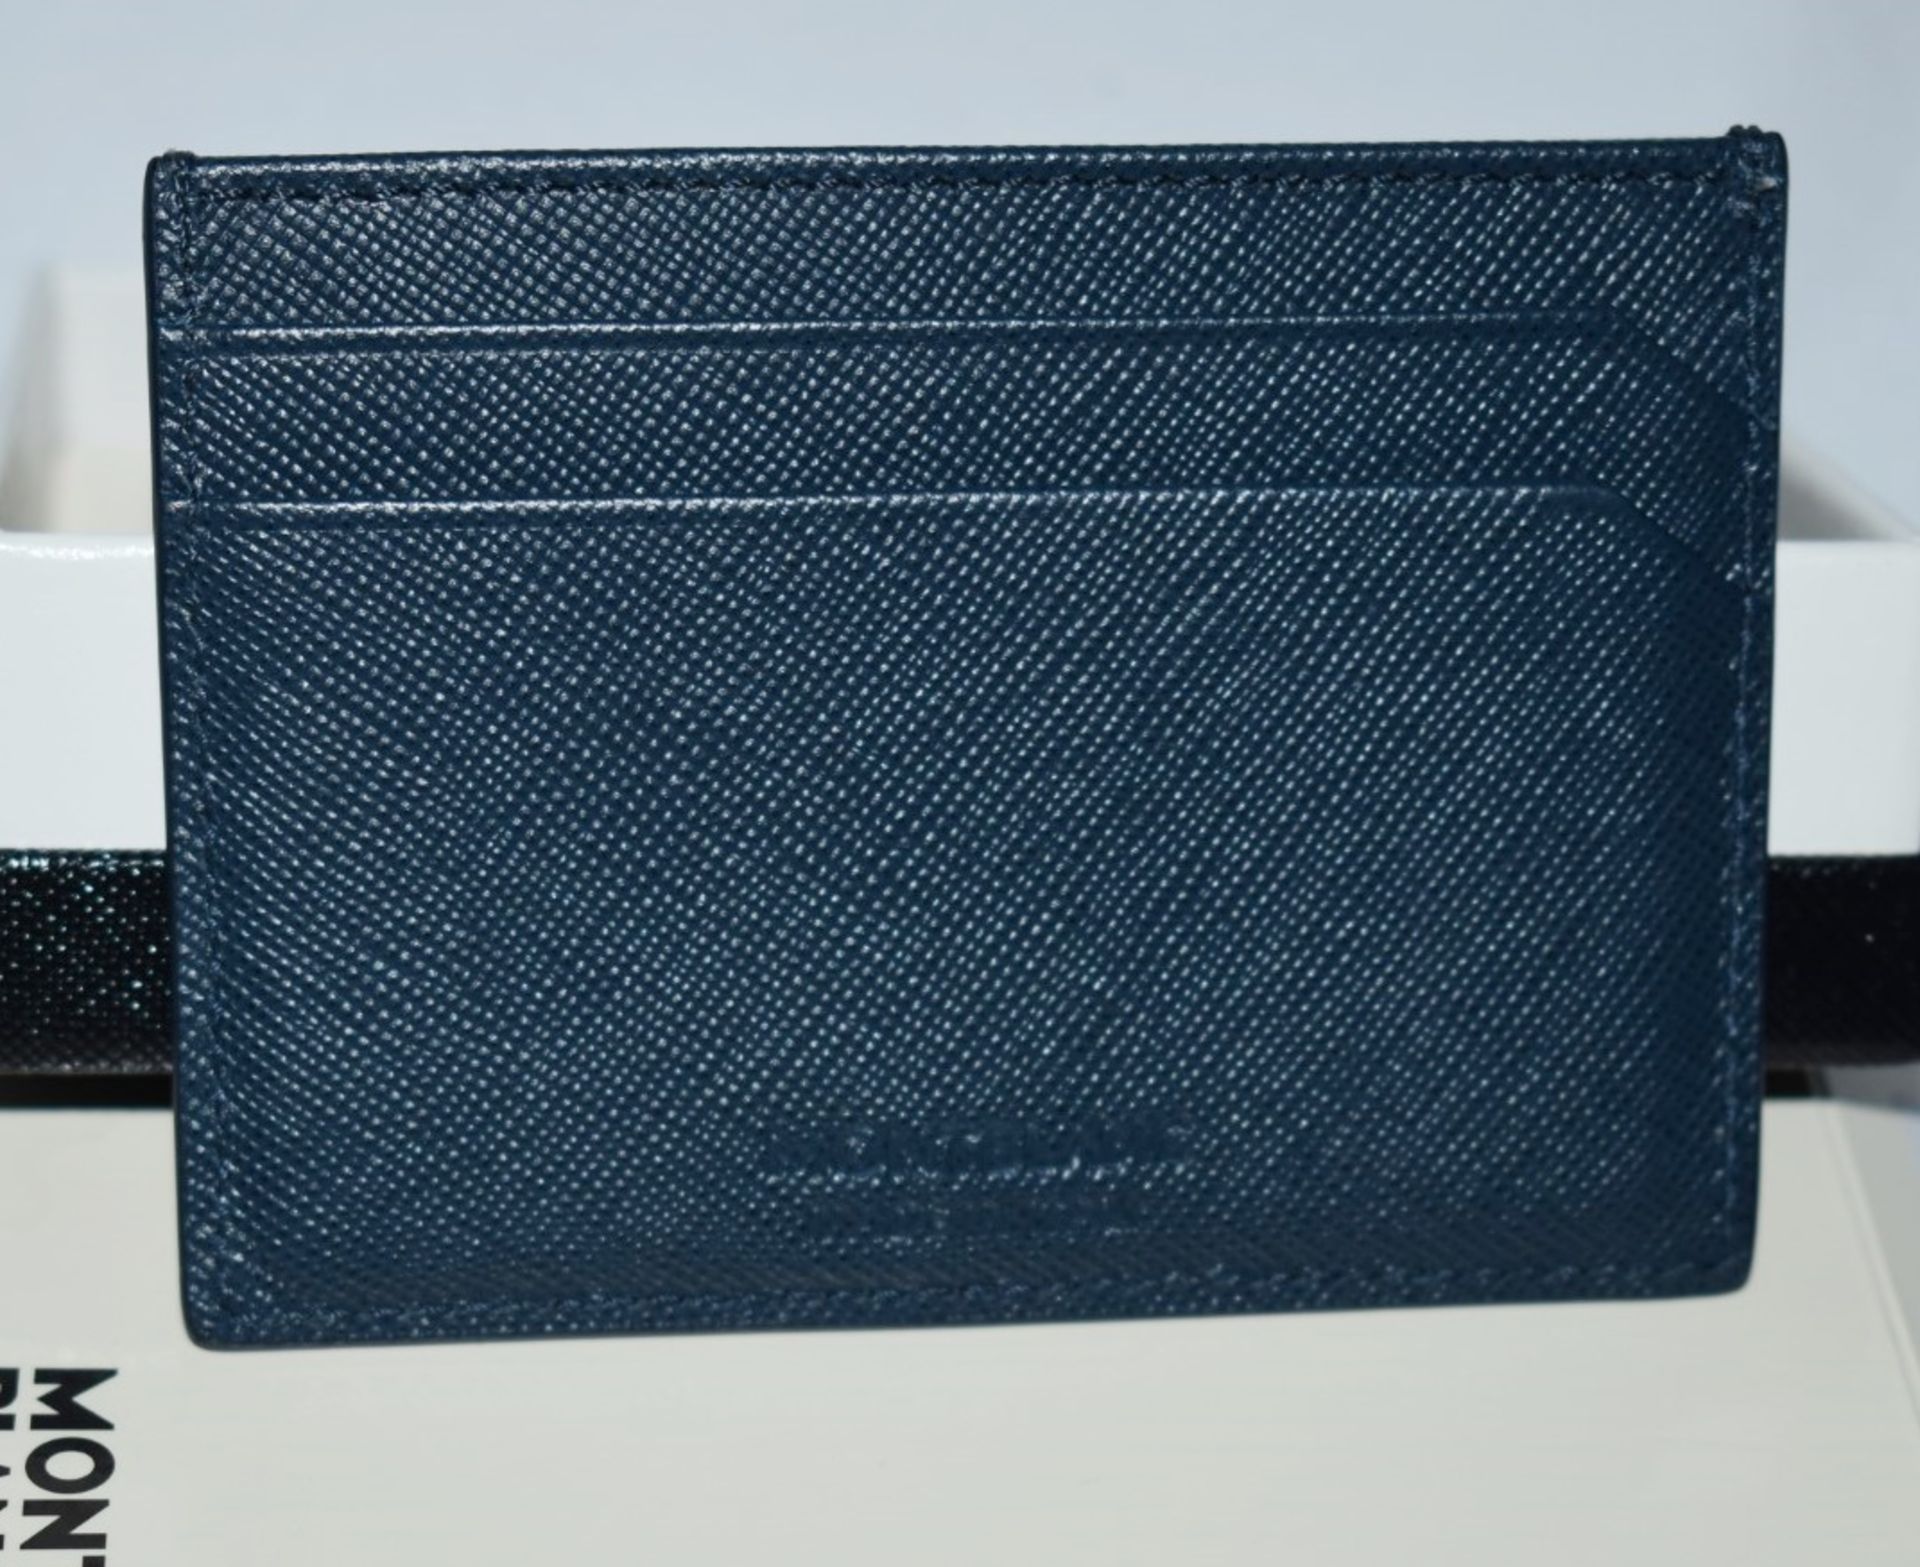 1 x MONTBLANC Sartorial Blue Luxury Leather Card Holder - Original Price £160.00 - Boxed Stock - Image 5 of 10